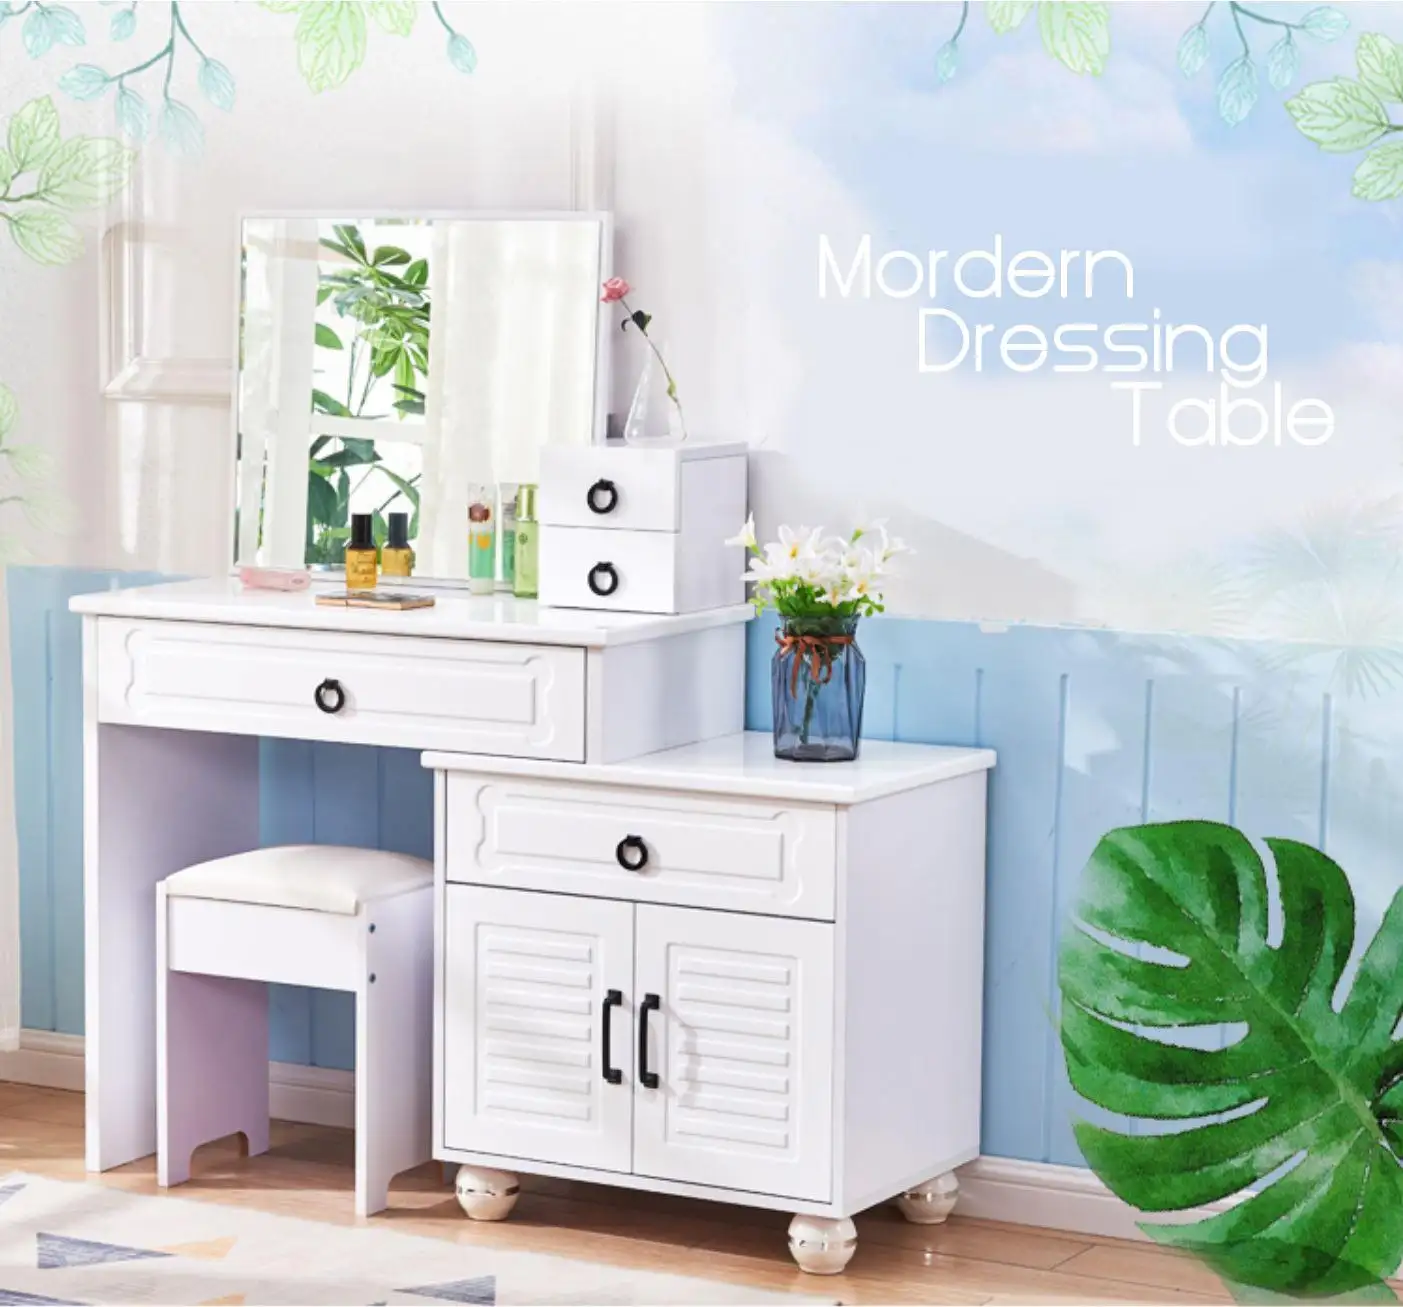 Lyh Dressing Table With Large Storage Side Table Simple Modern Elegant Classy Master Bedroom Make Up Dresser Hdb Condo House Delivery Within 3 Weeks Lazada Singapore,Portfolio Design For Students Folder